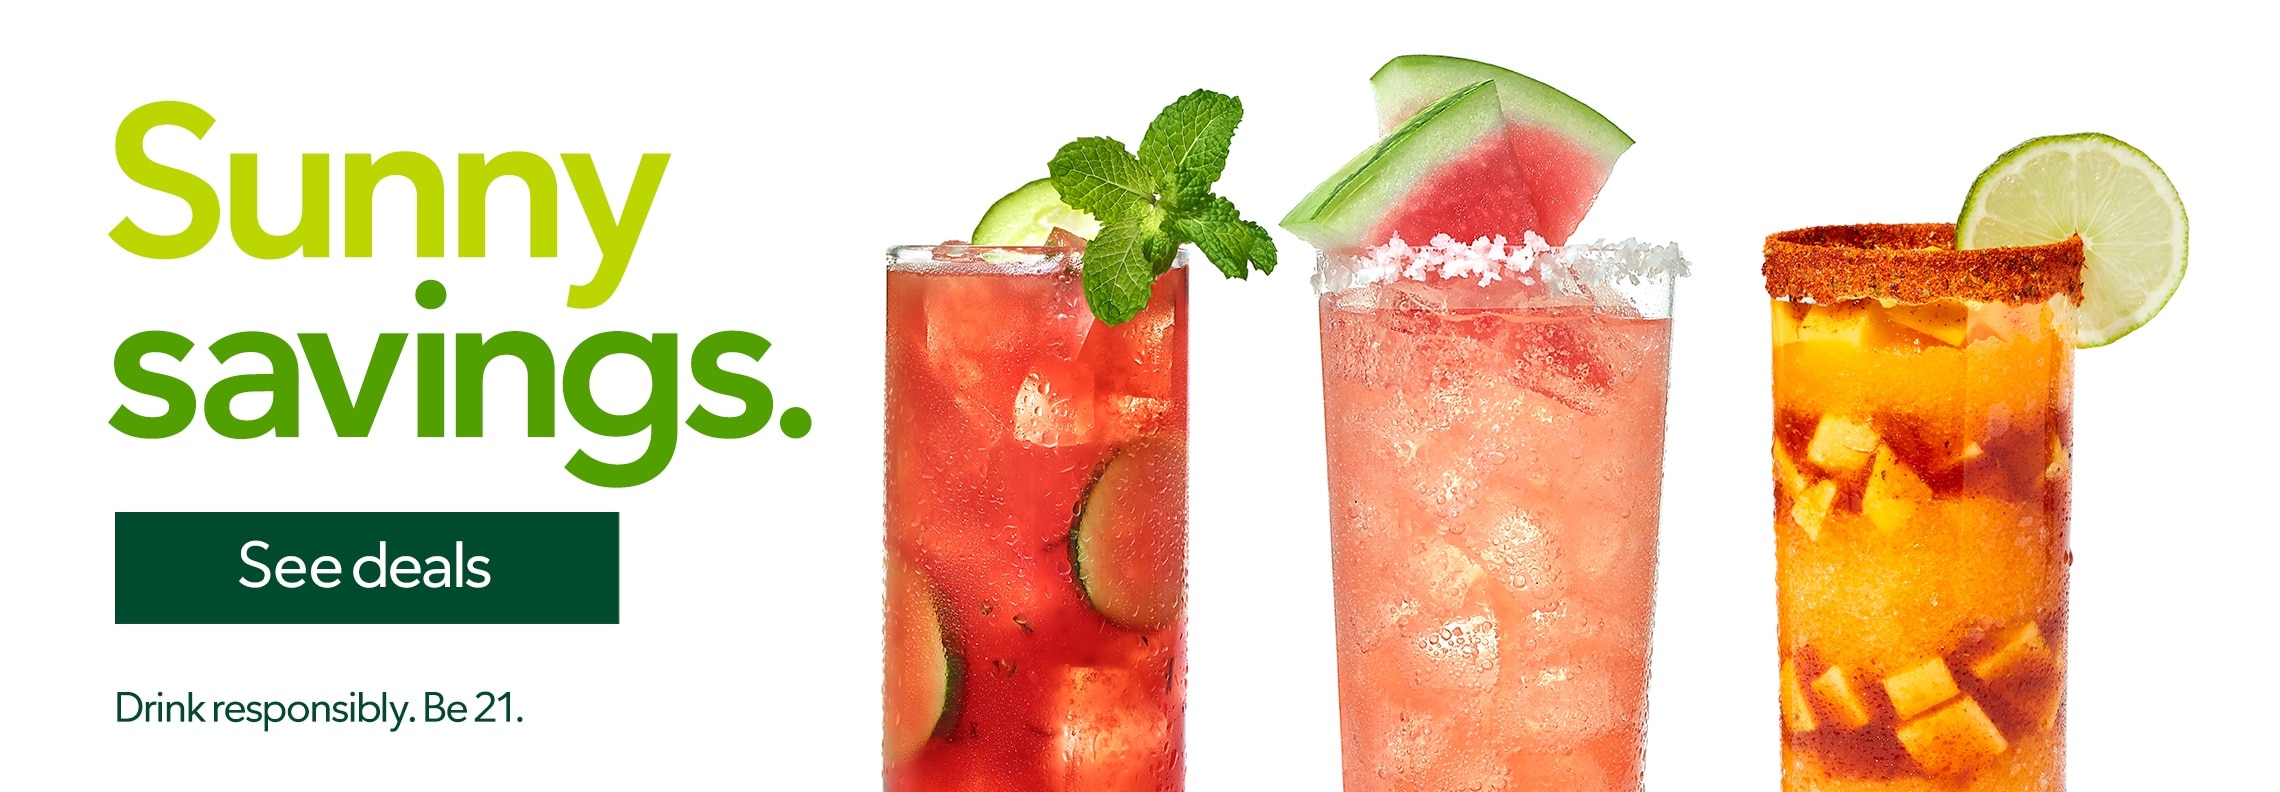 Sunny savings. See deals.  Drink responsibly. Be 21.